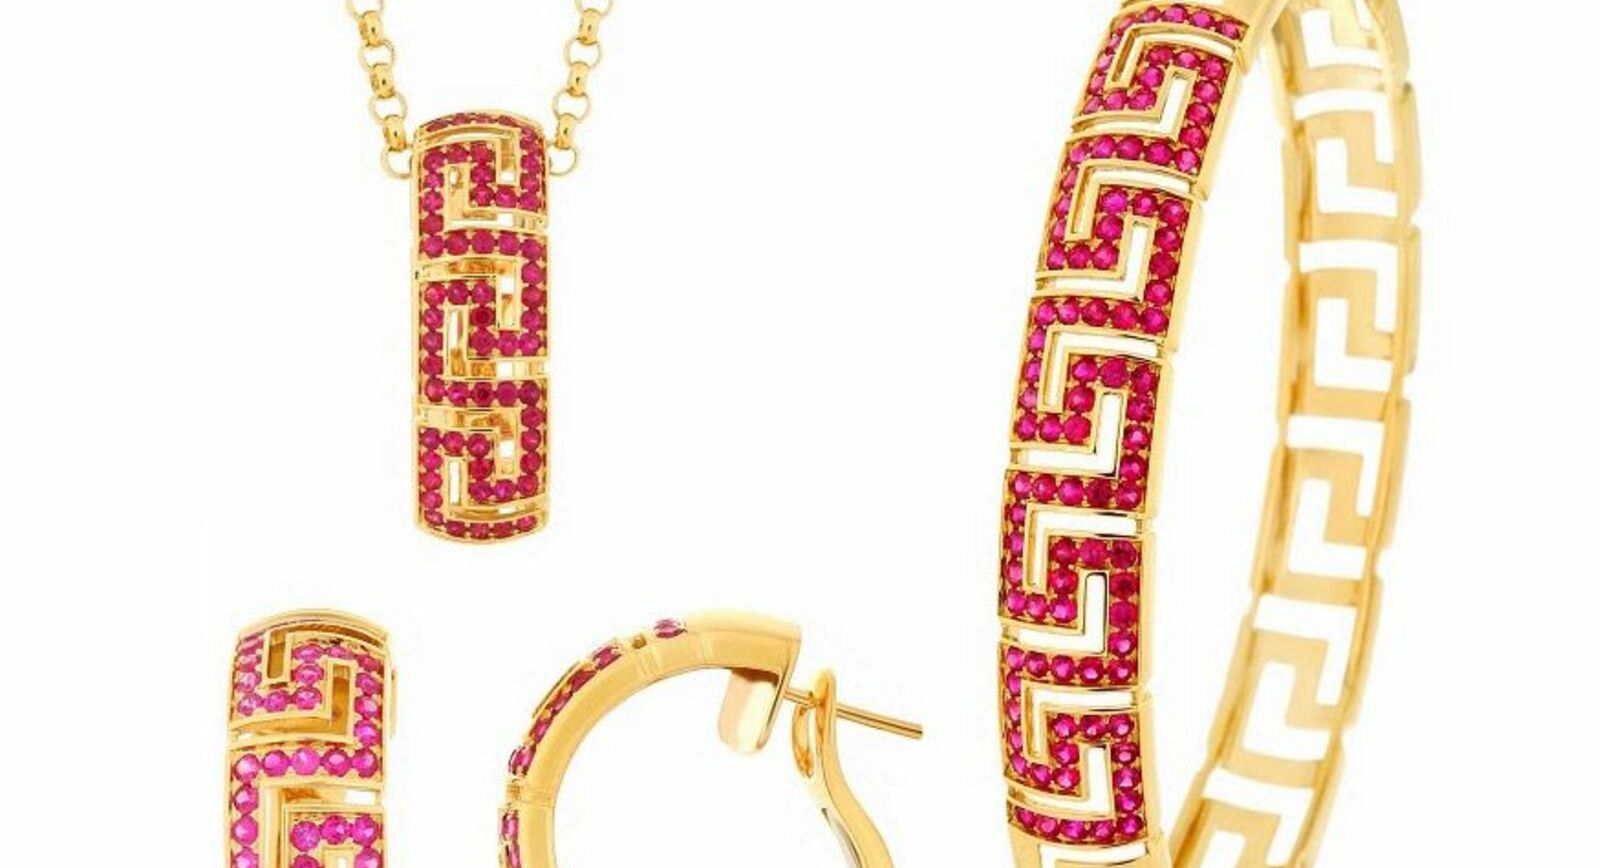 Versace launches new Greca collection just in time for Valentine’s Day